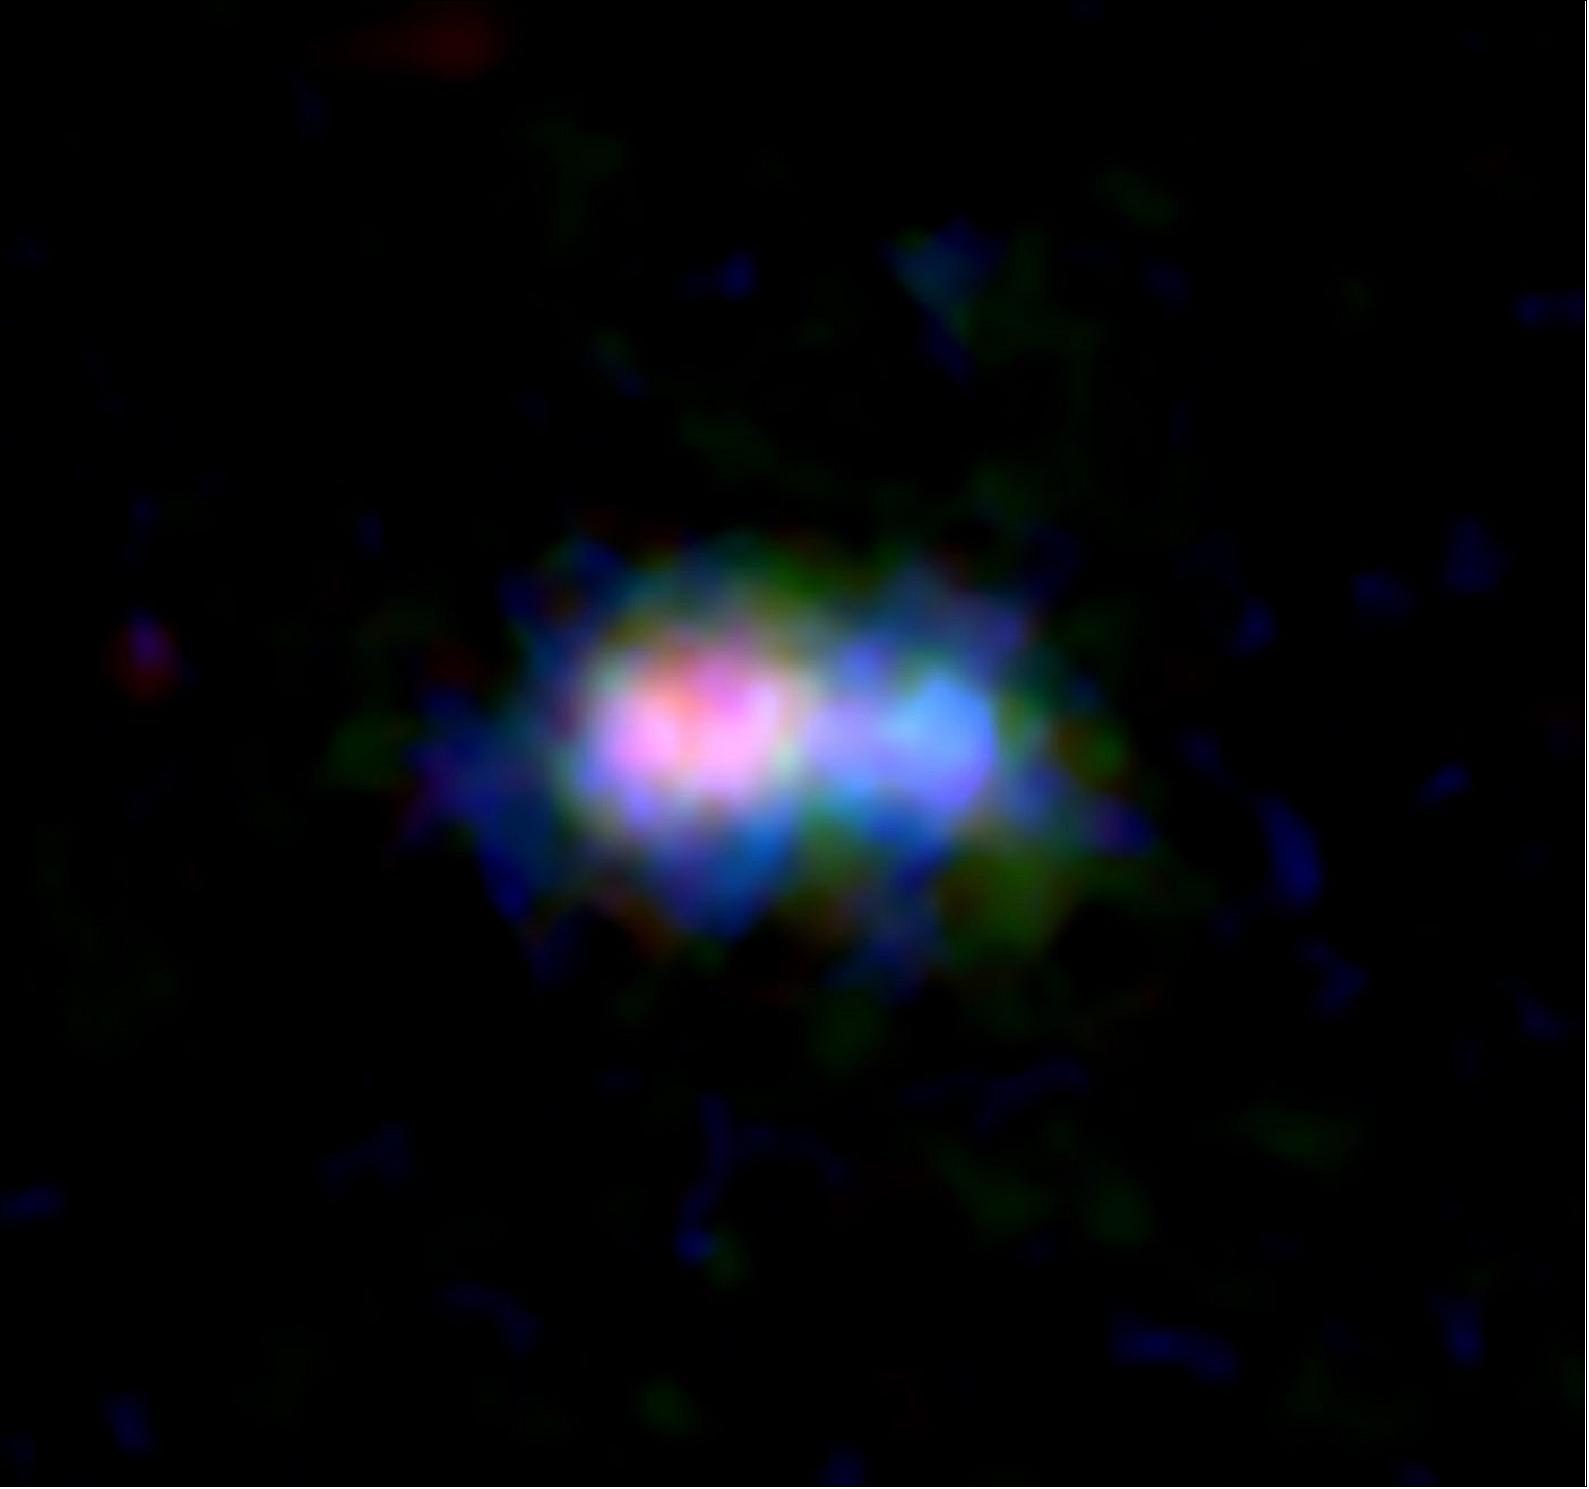 Figure 94: ALMA and Hubble Space Telescope (HST) image of the distant galaxy MACS0416_Y1. Distribution of dust and oxygen gas traced by ALMA are shown in red and green, respectively, while the distribution of stars captured by HST is shown in blue [image credit: ALMA (ESO/NAOJ/NRAO), NASA/ESA Hubble Space Telescope, Tamura, et al.]